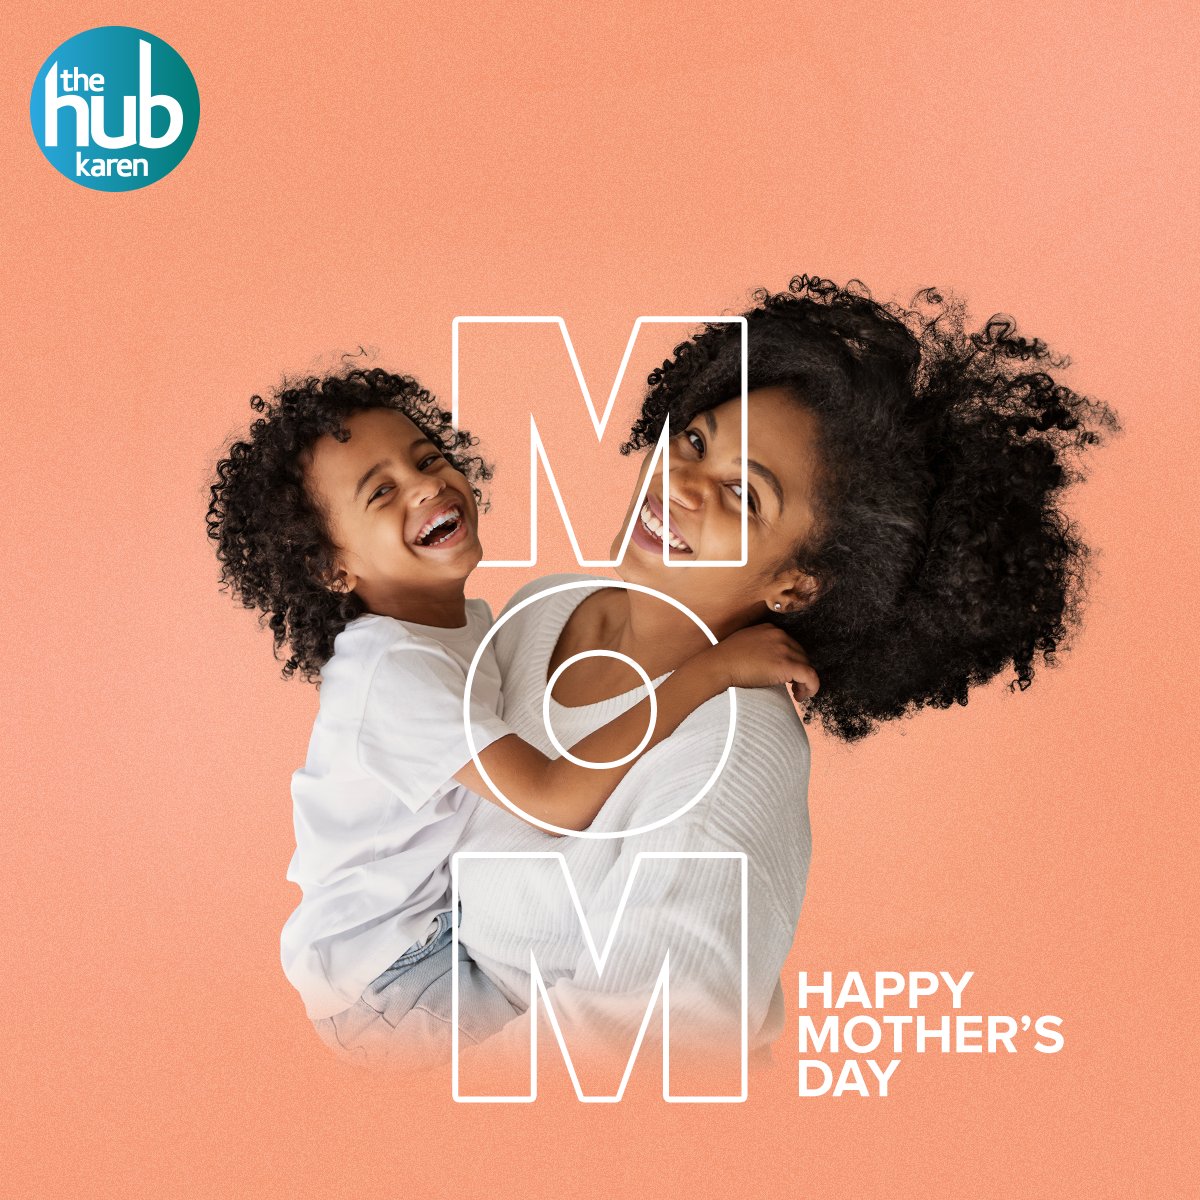 Happy Mother's Day to all moms🌸. Today, we celebrate the love, strength, and endless sacrifices that make motherhood so special. #MothersDay #MothersDaySpecial #MothersdDayCelebration #TheHubKaren #THK